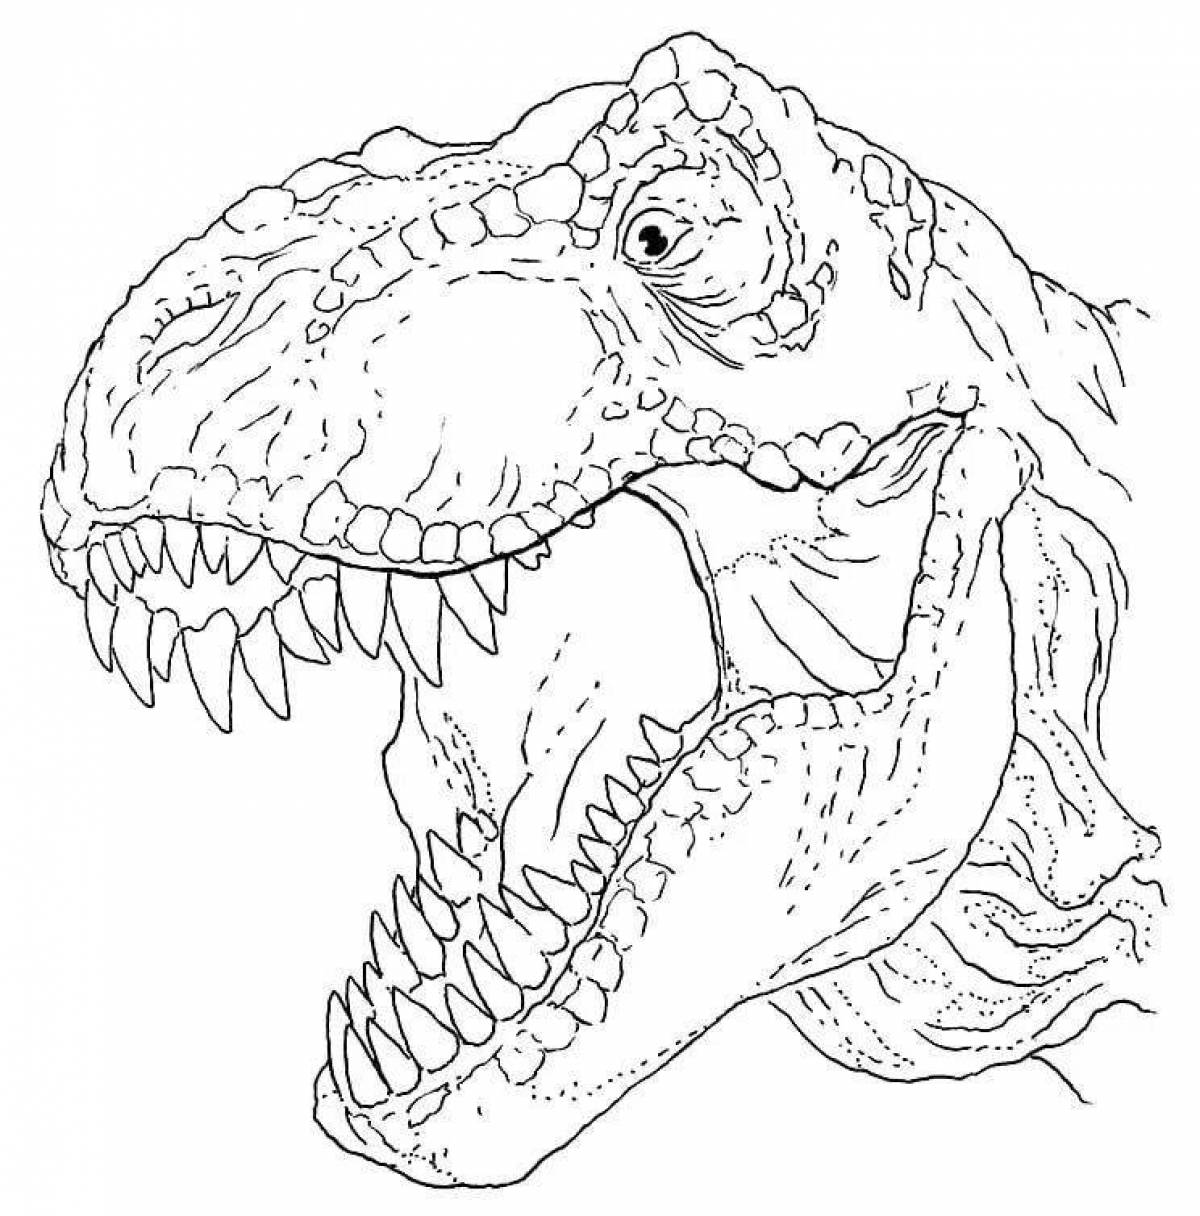 Tirex playful coloring page